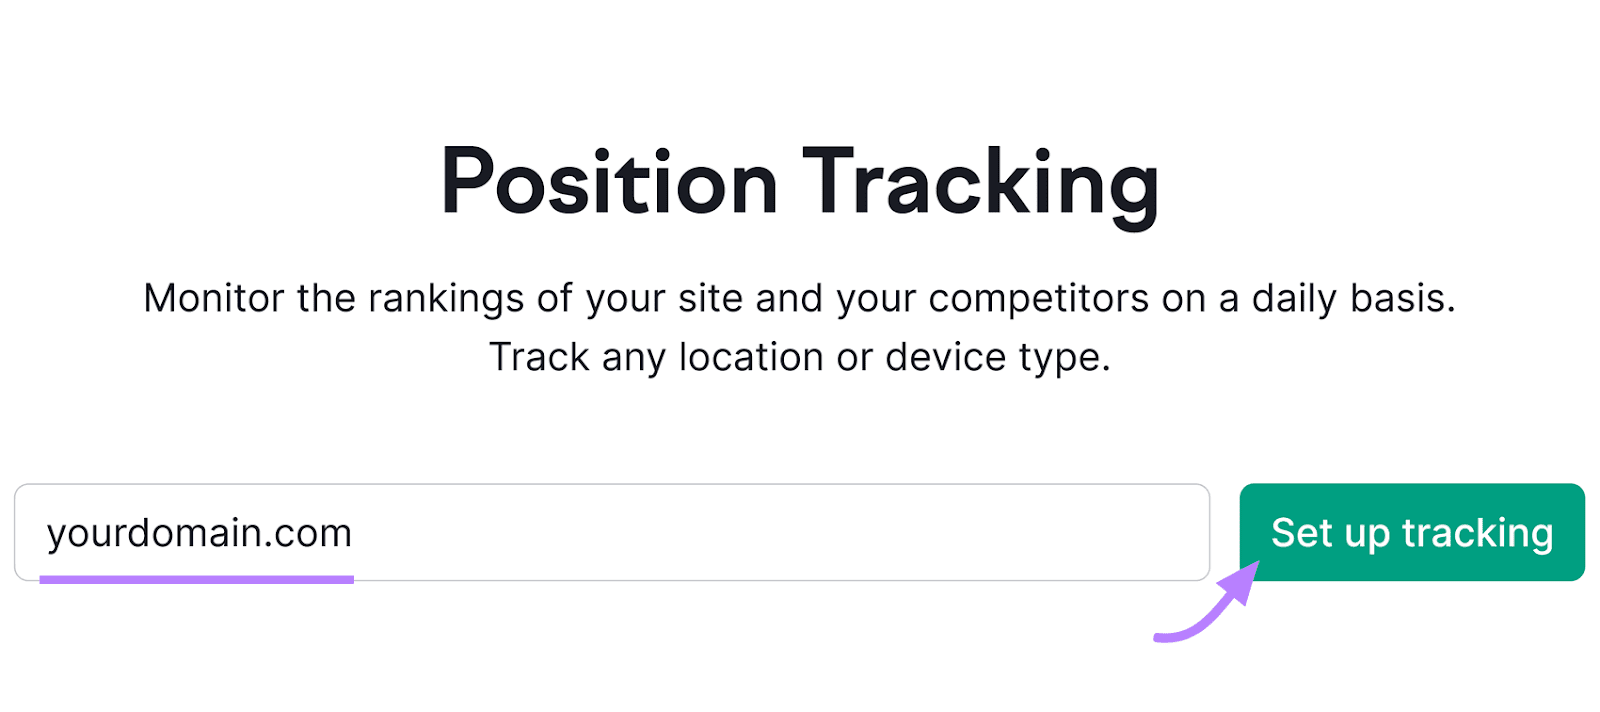 Position Tracking interface with input field for domain and "Set up tracking" button highlighted with a purple curved arrow.